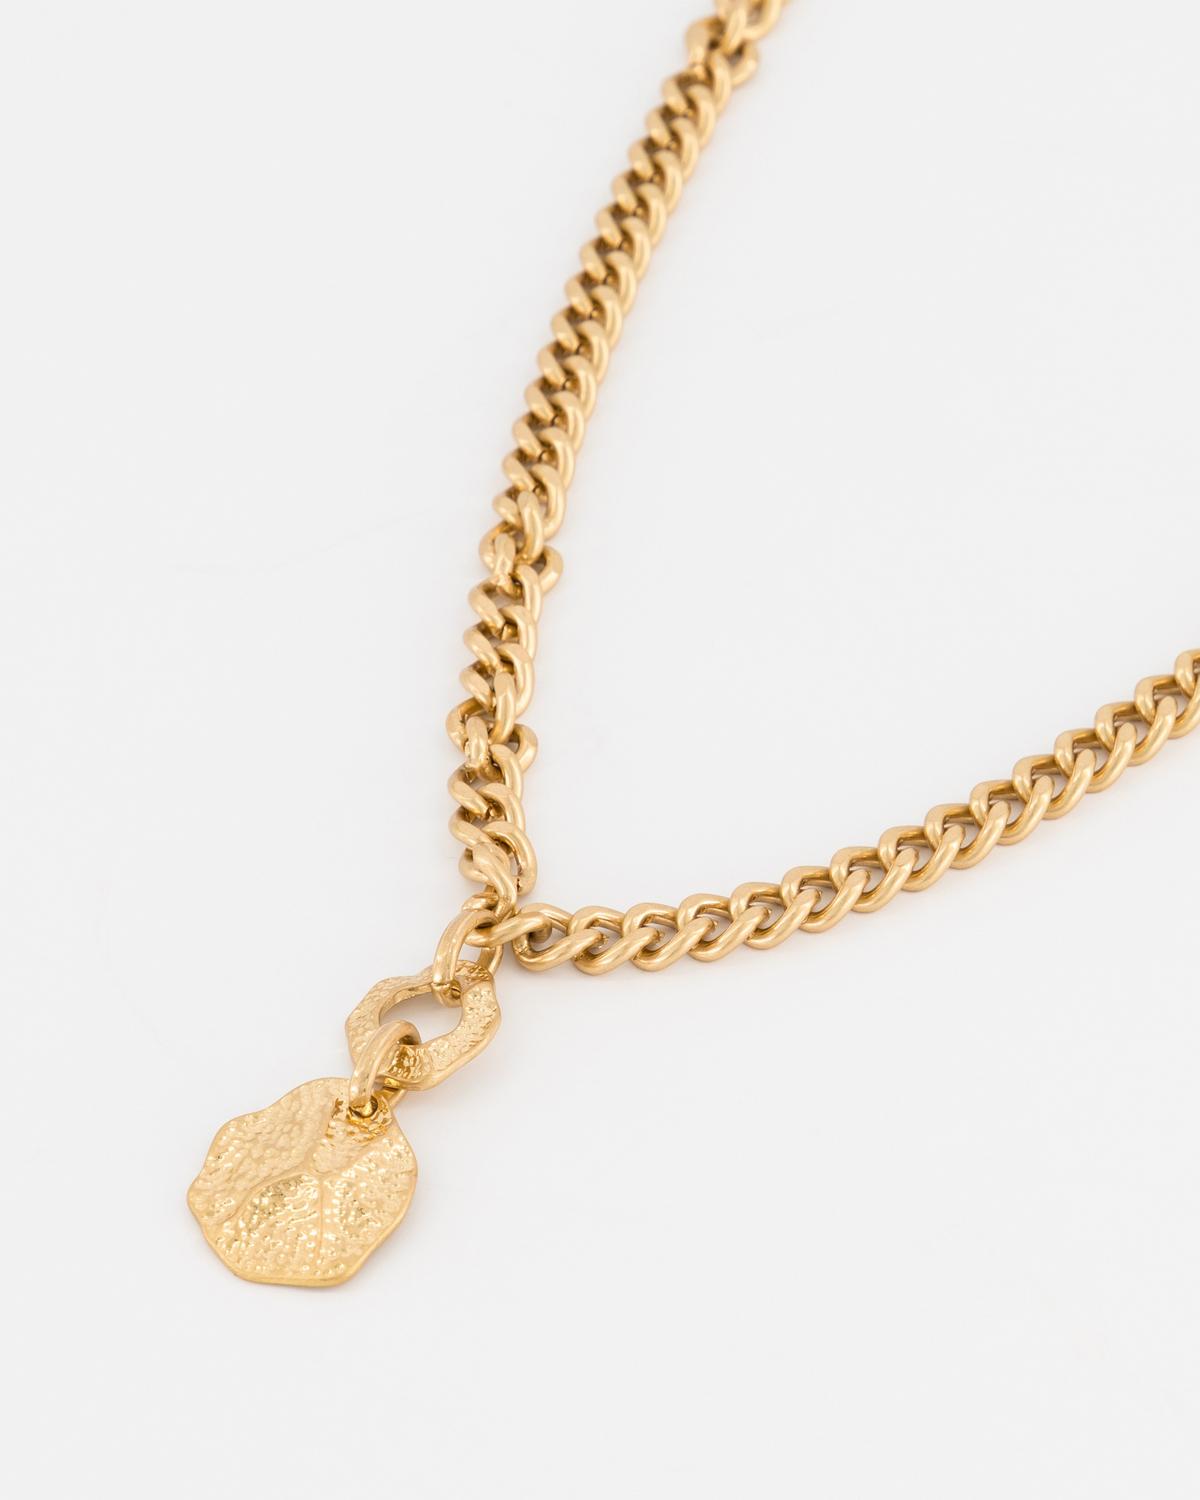 Women’s Hammered Charm Chain Necklace  -  Gold